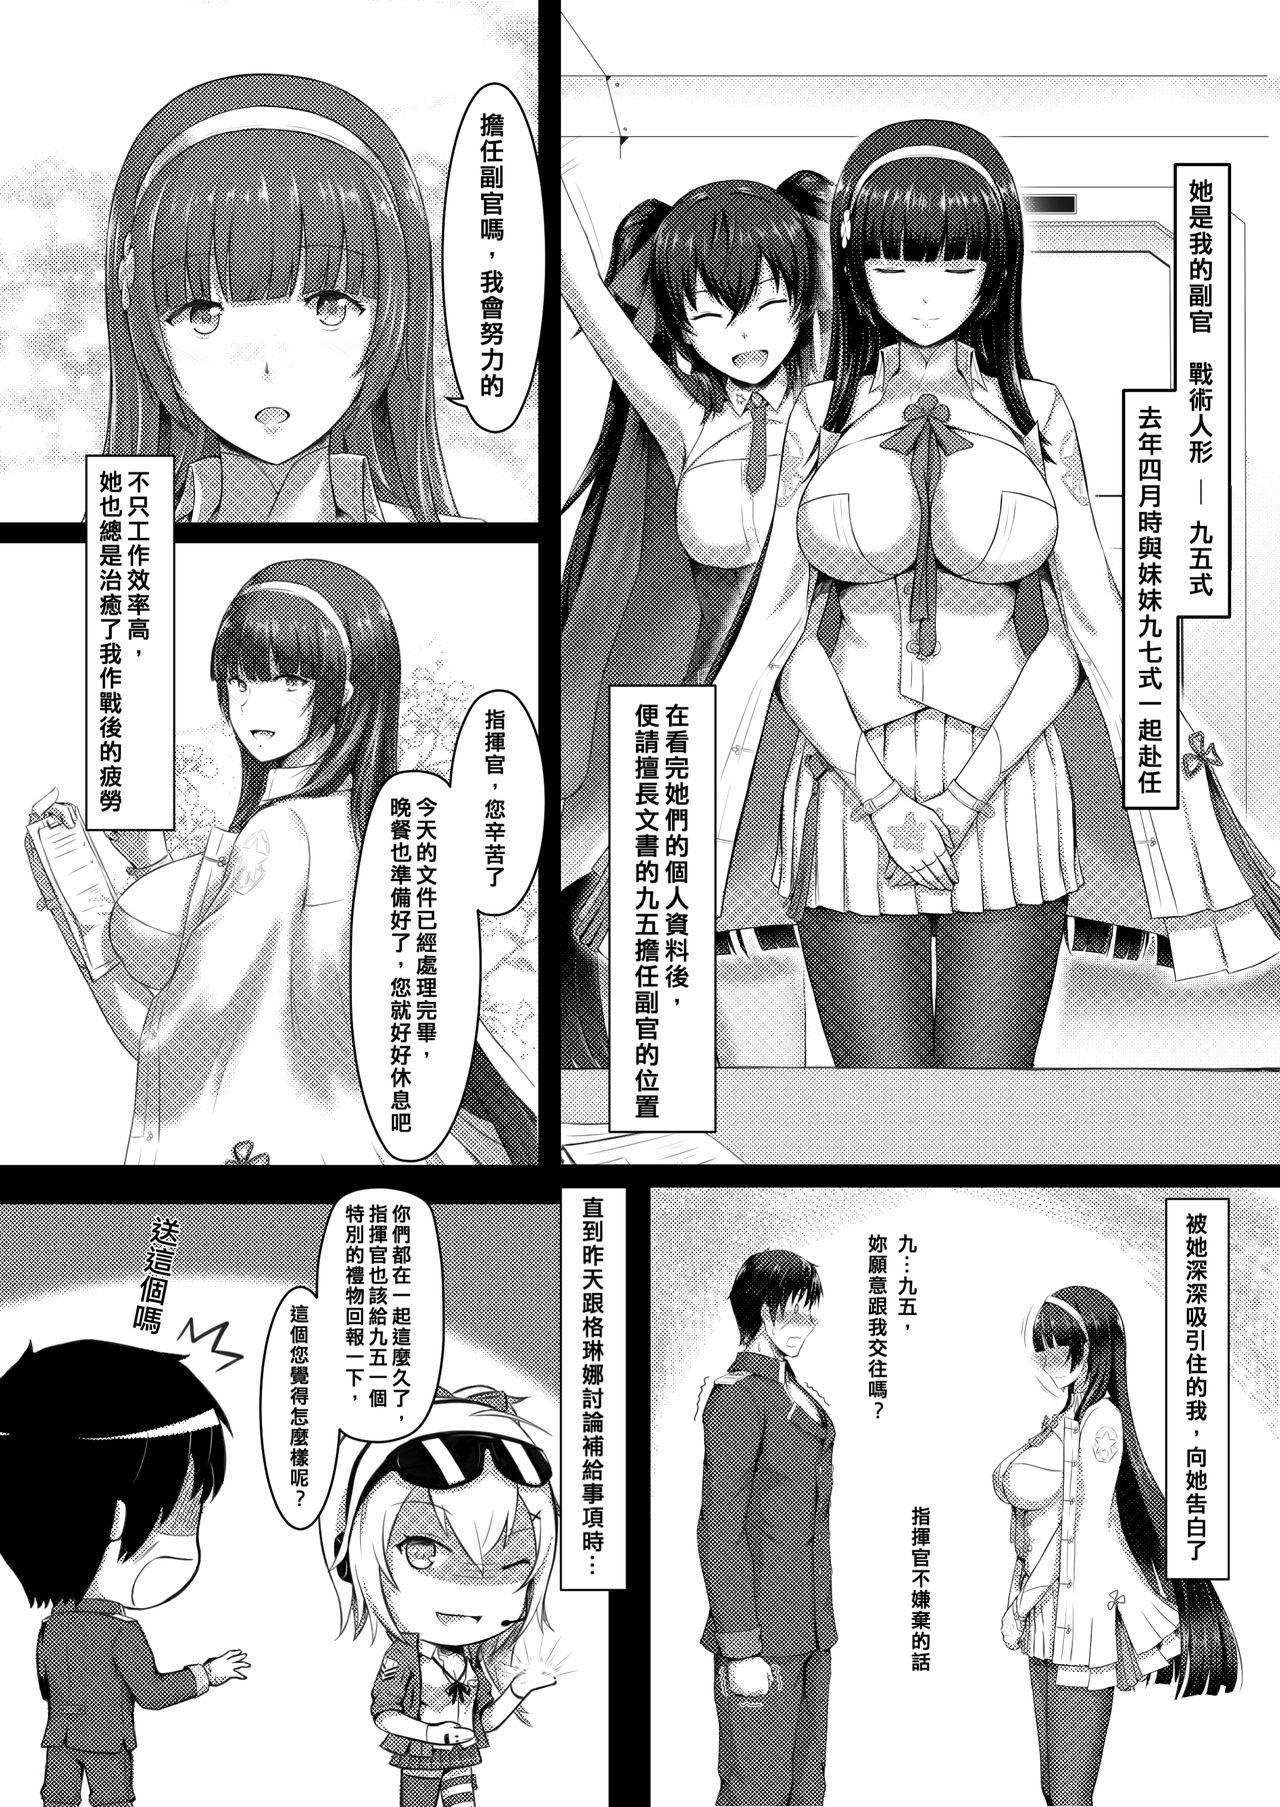 Ass Fuck Xihuazhili - Girls frontline Bedroom - Page 3